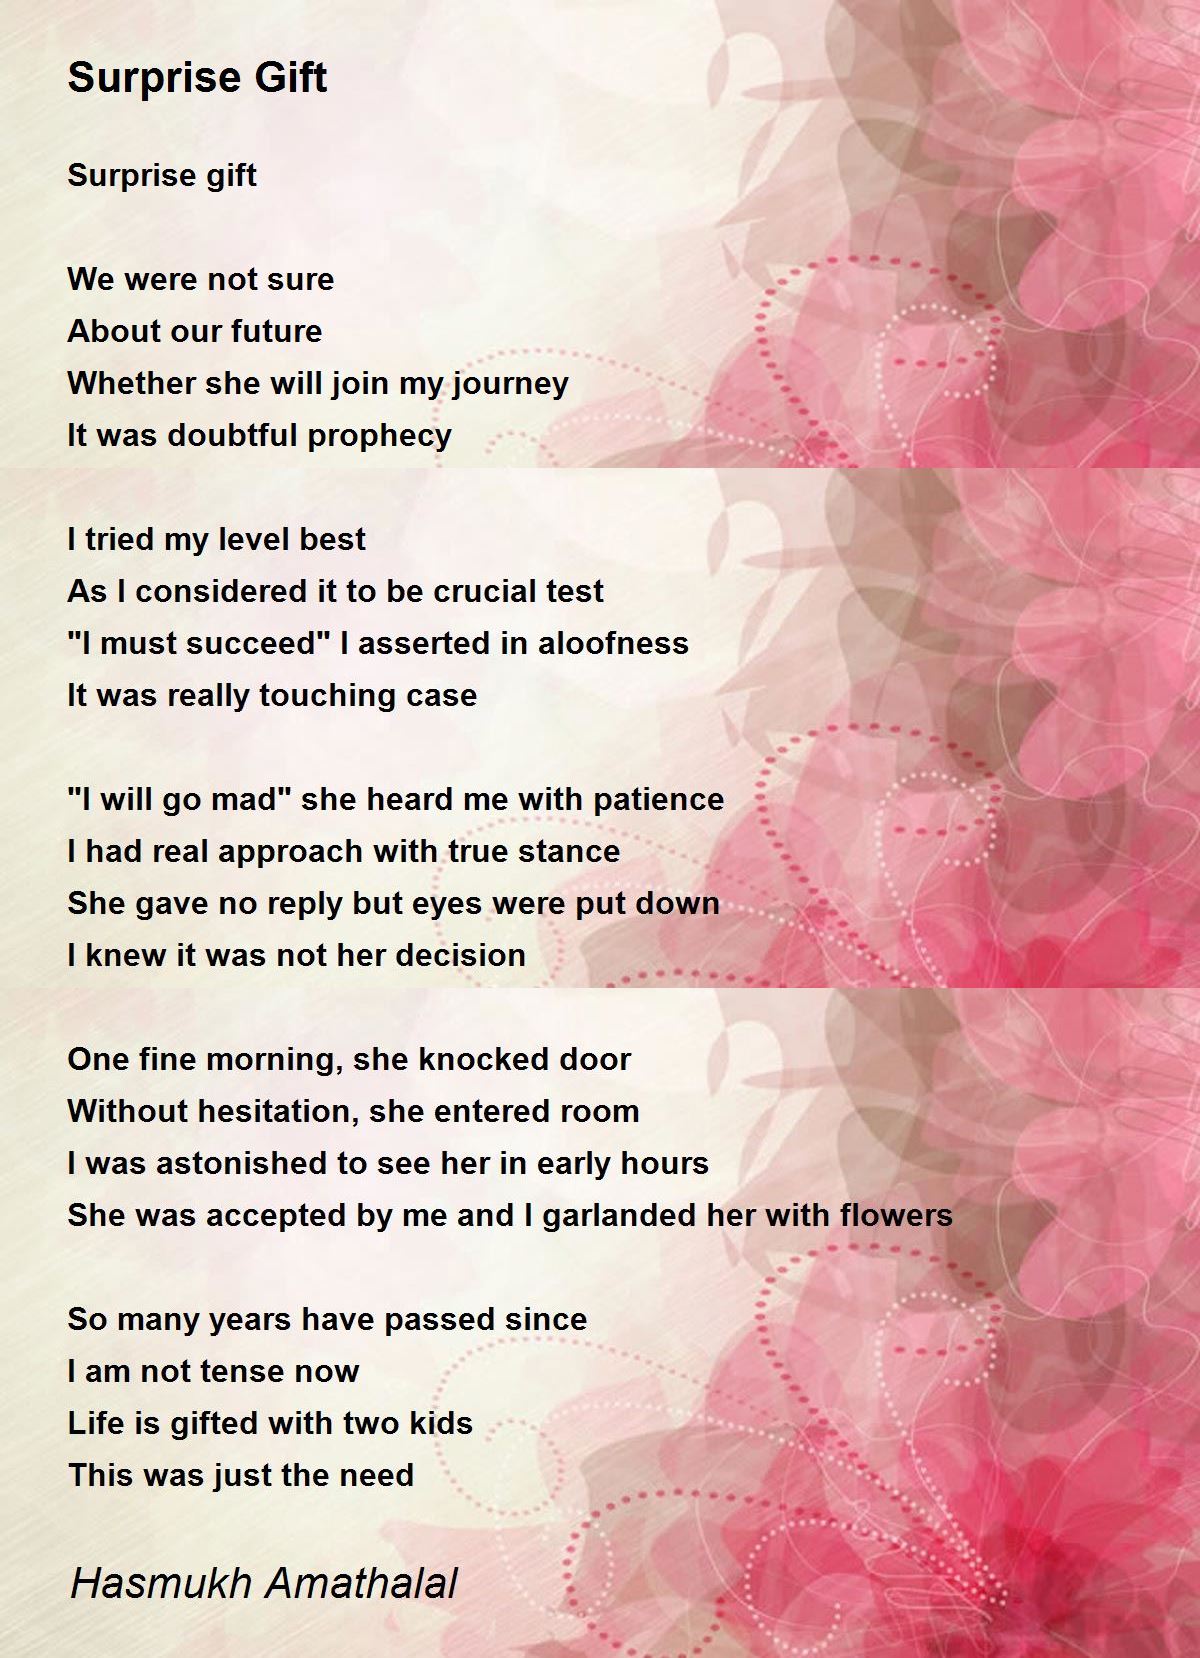 The Wait For A Gift  The Wait For A Gift Poem by manamkeri noushad Alam saj